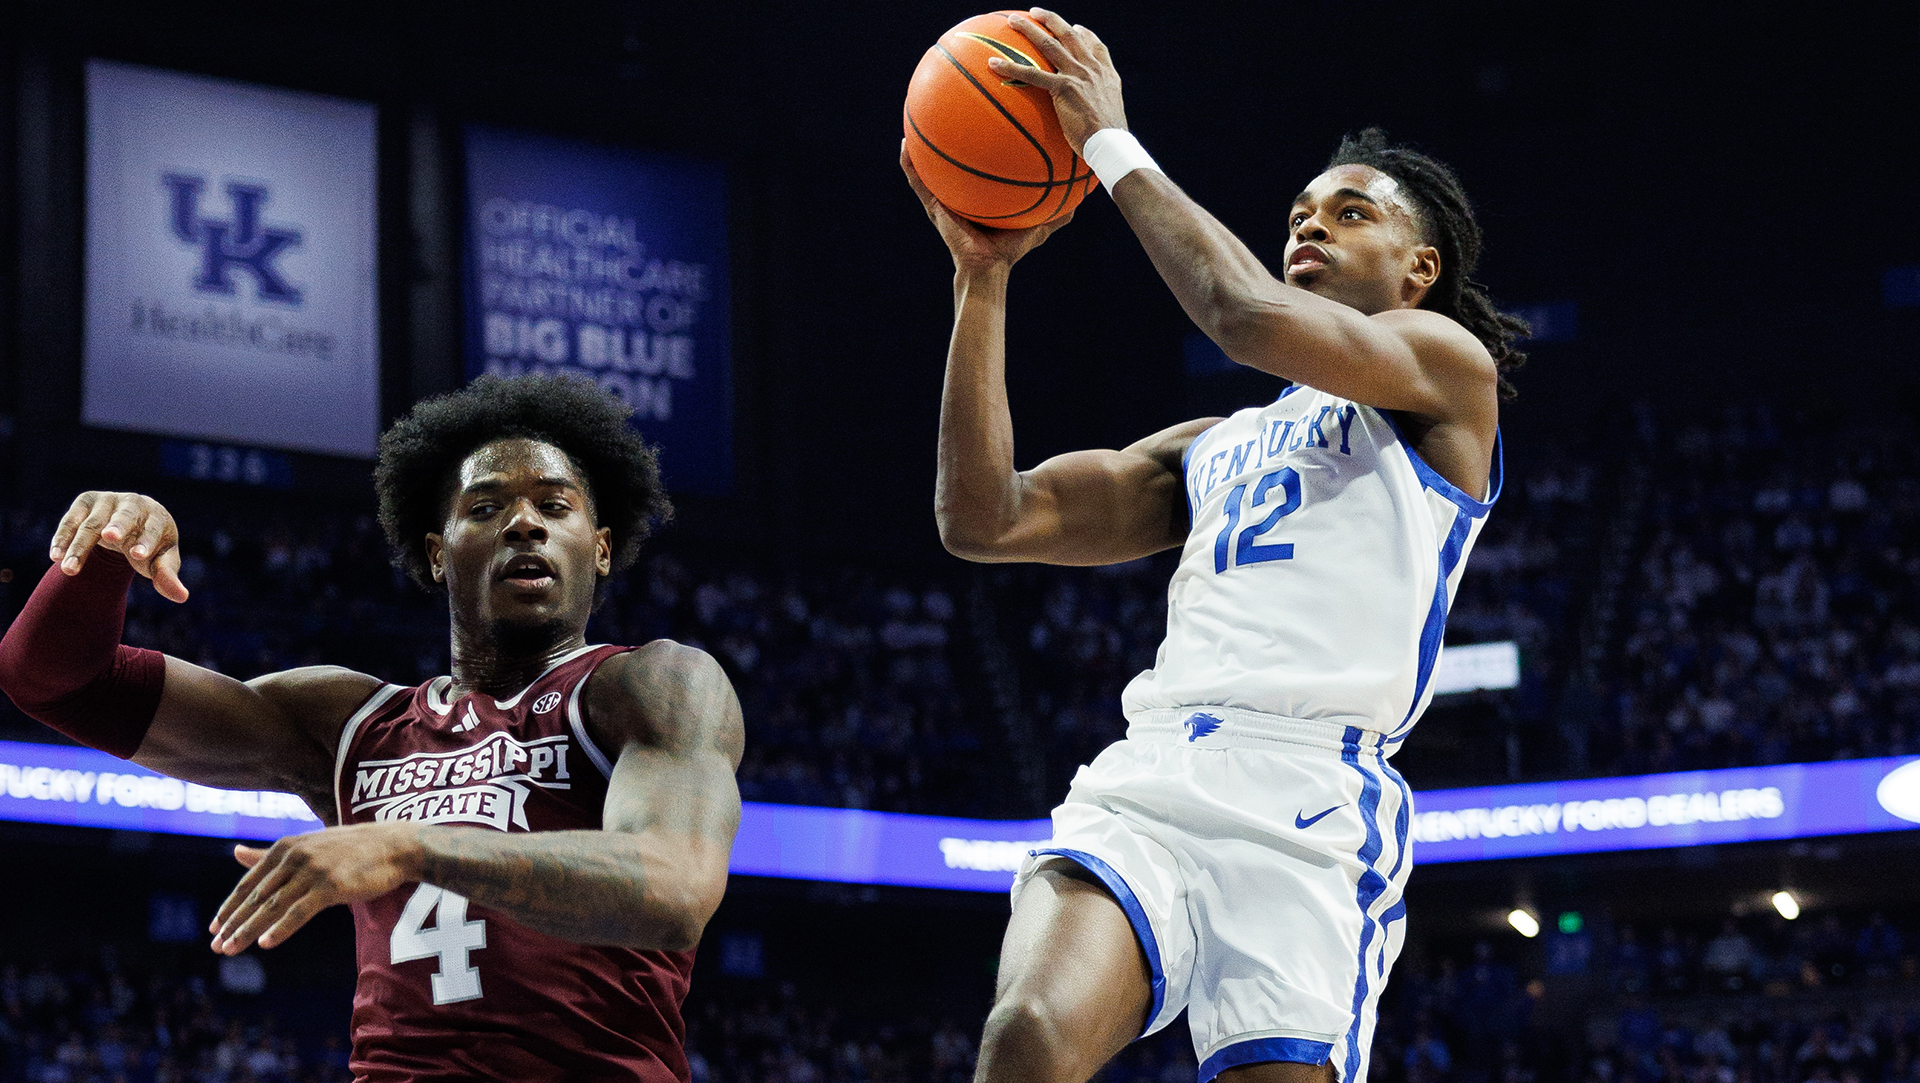 Kentucky-Mississippi State Men's Basketball Postgame Quotes